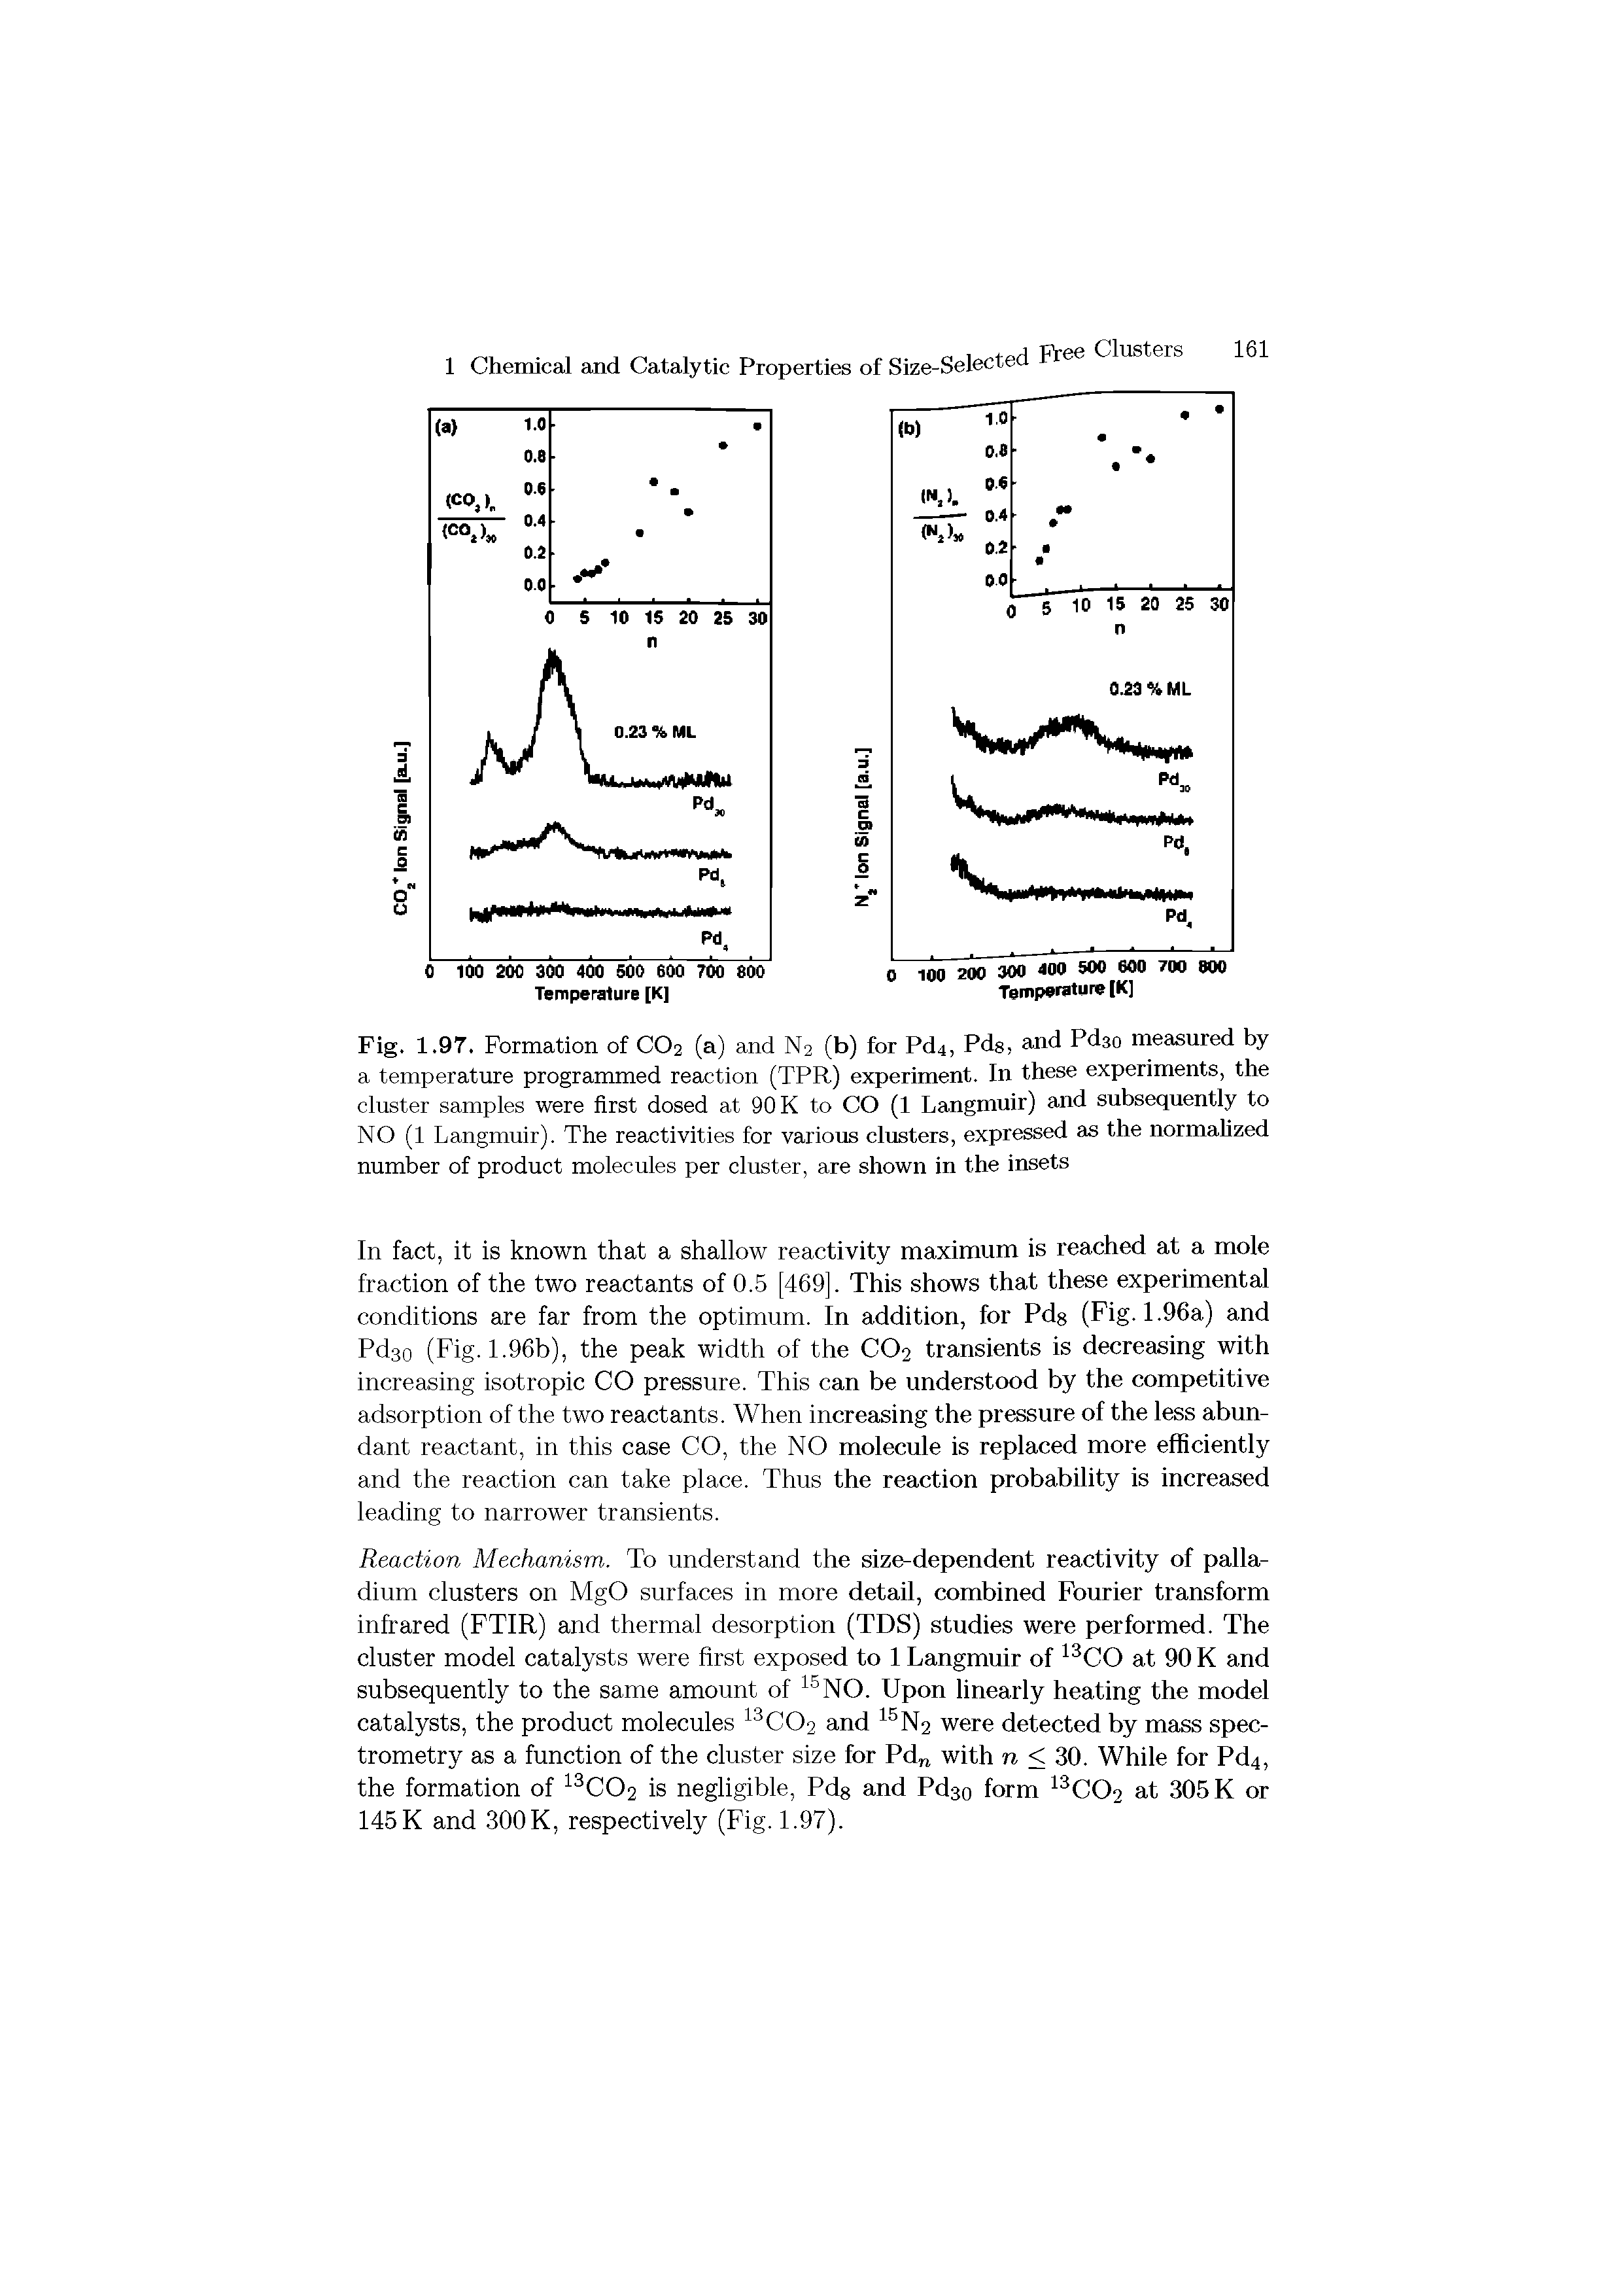 Fig. 1.97. Formation of CO2 (a) and N2 (b) for Pd4, Pds, and Pdso measured by a temperature programmed reaction (TPR) experiment. In these experiments, the cluster samples were first dosed at 90 K to CO (1 Langmuir) and snbseqnently to NO (1 Langmuir). The reactivities for various clusters, expressed as the normahzed number of product molecules per cluster, are shown in the insets...